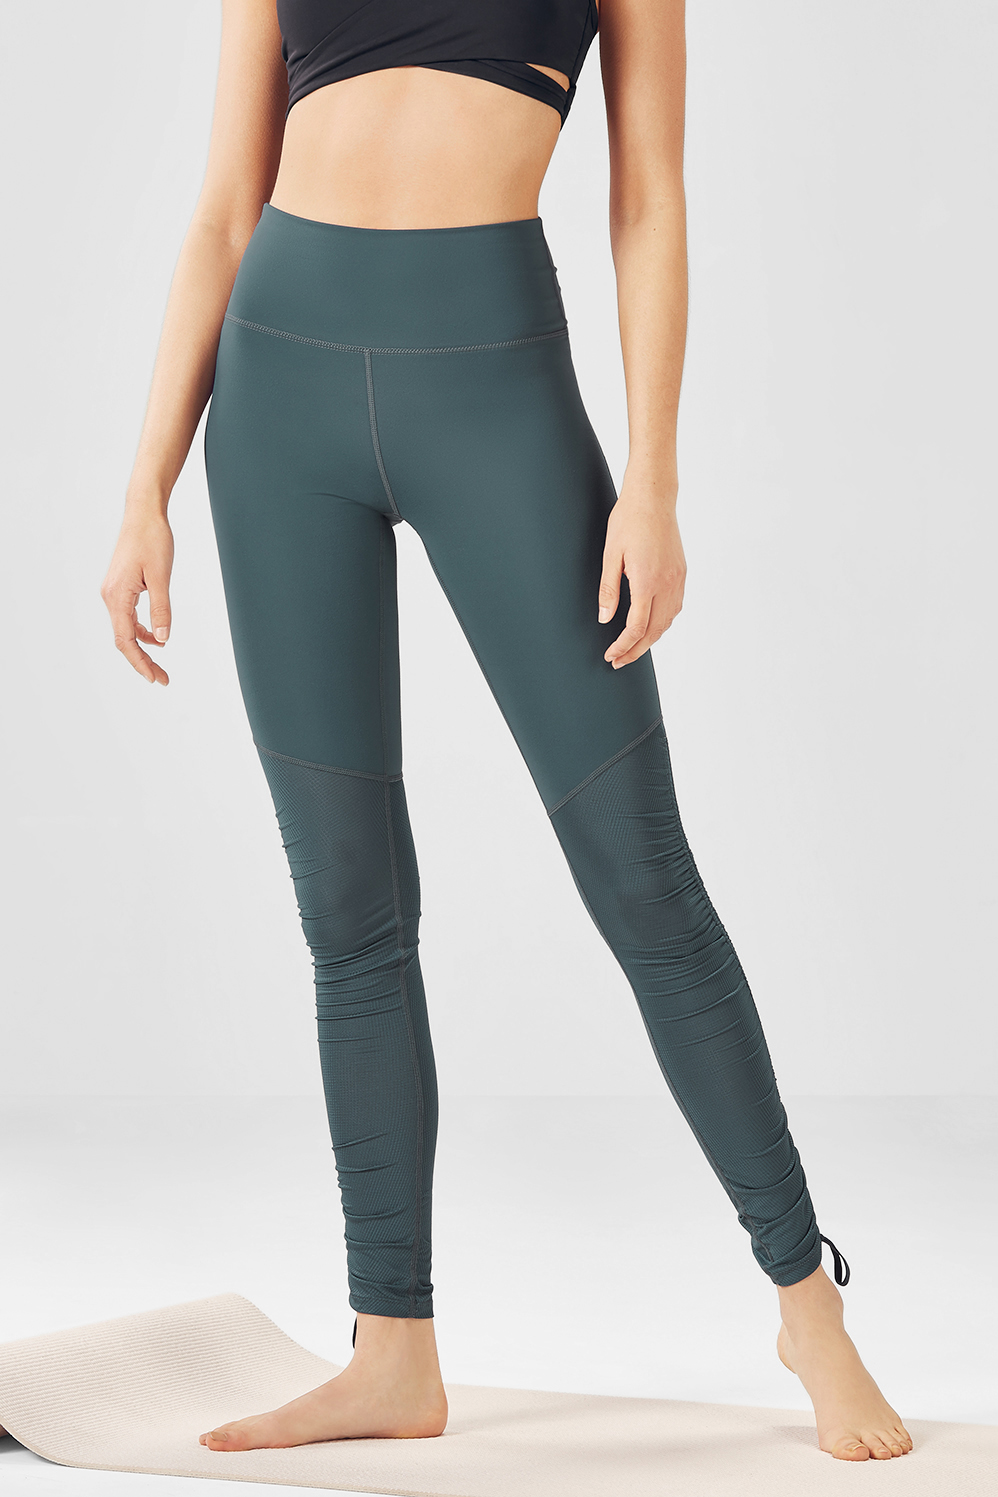 Cool Wholesale kate hudson legging In Any Size And Style 